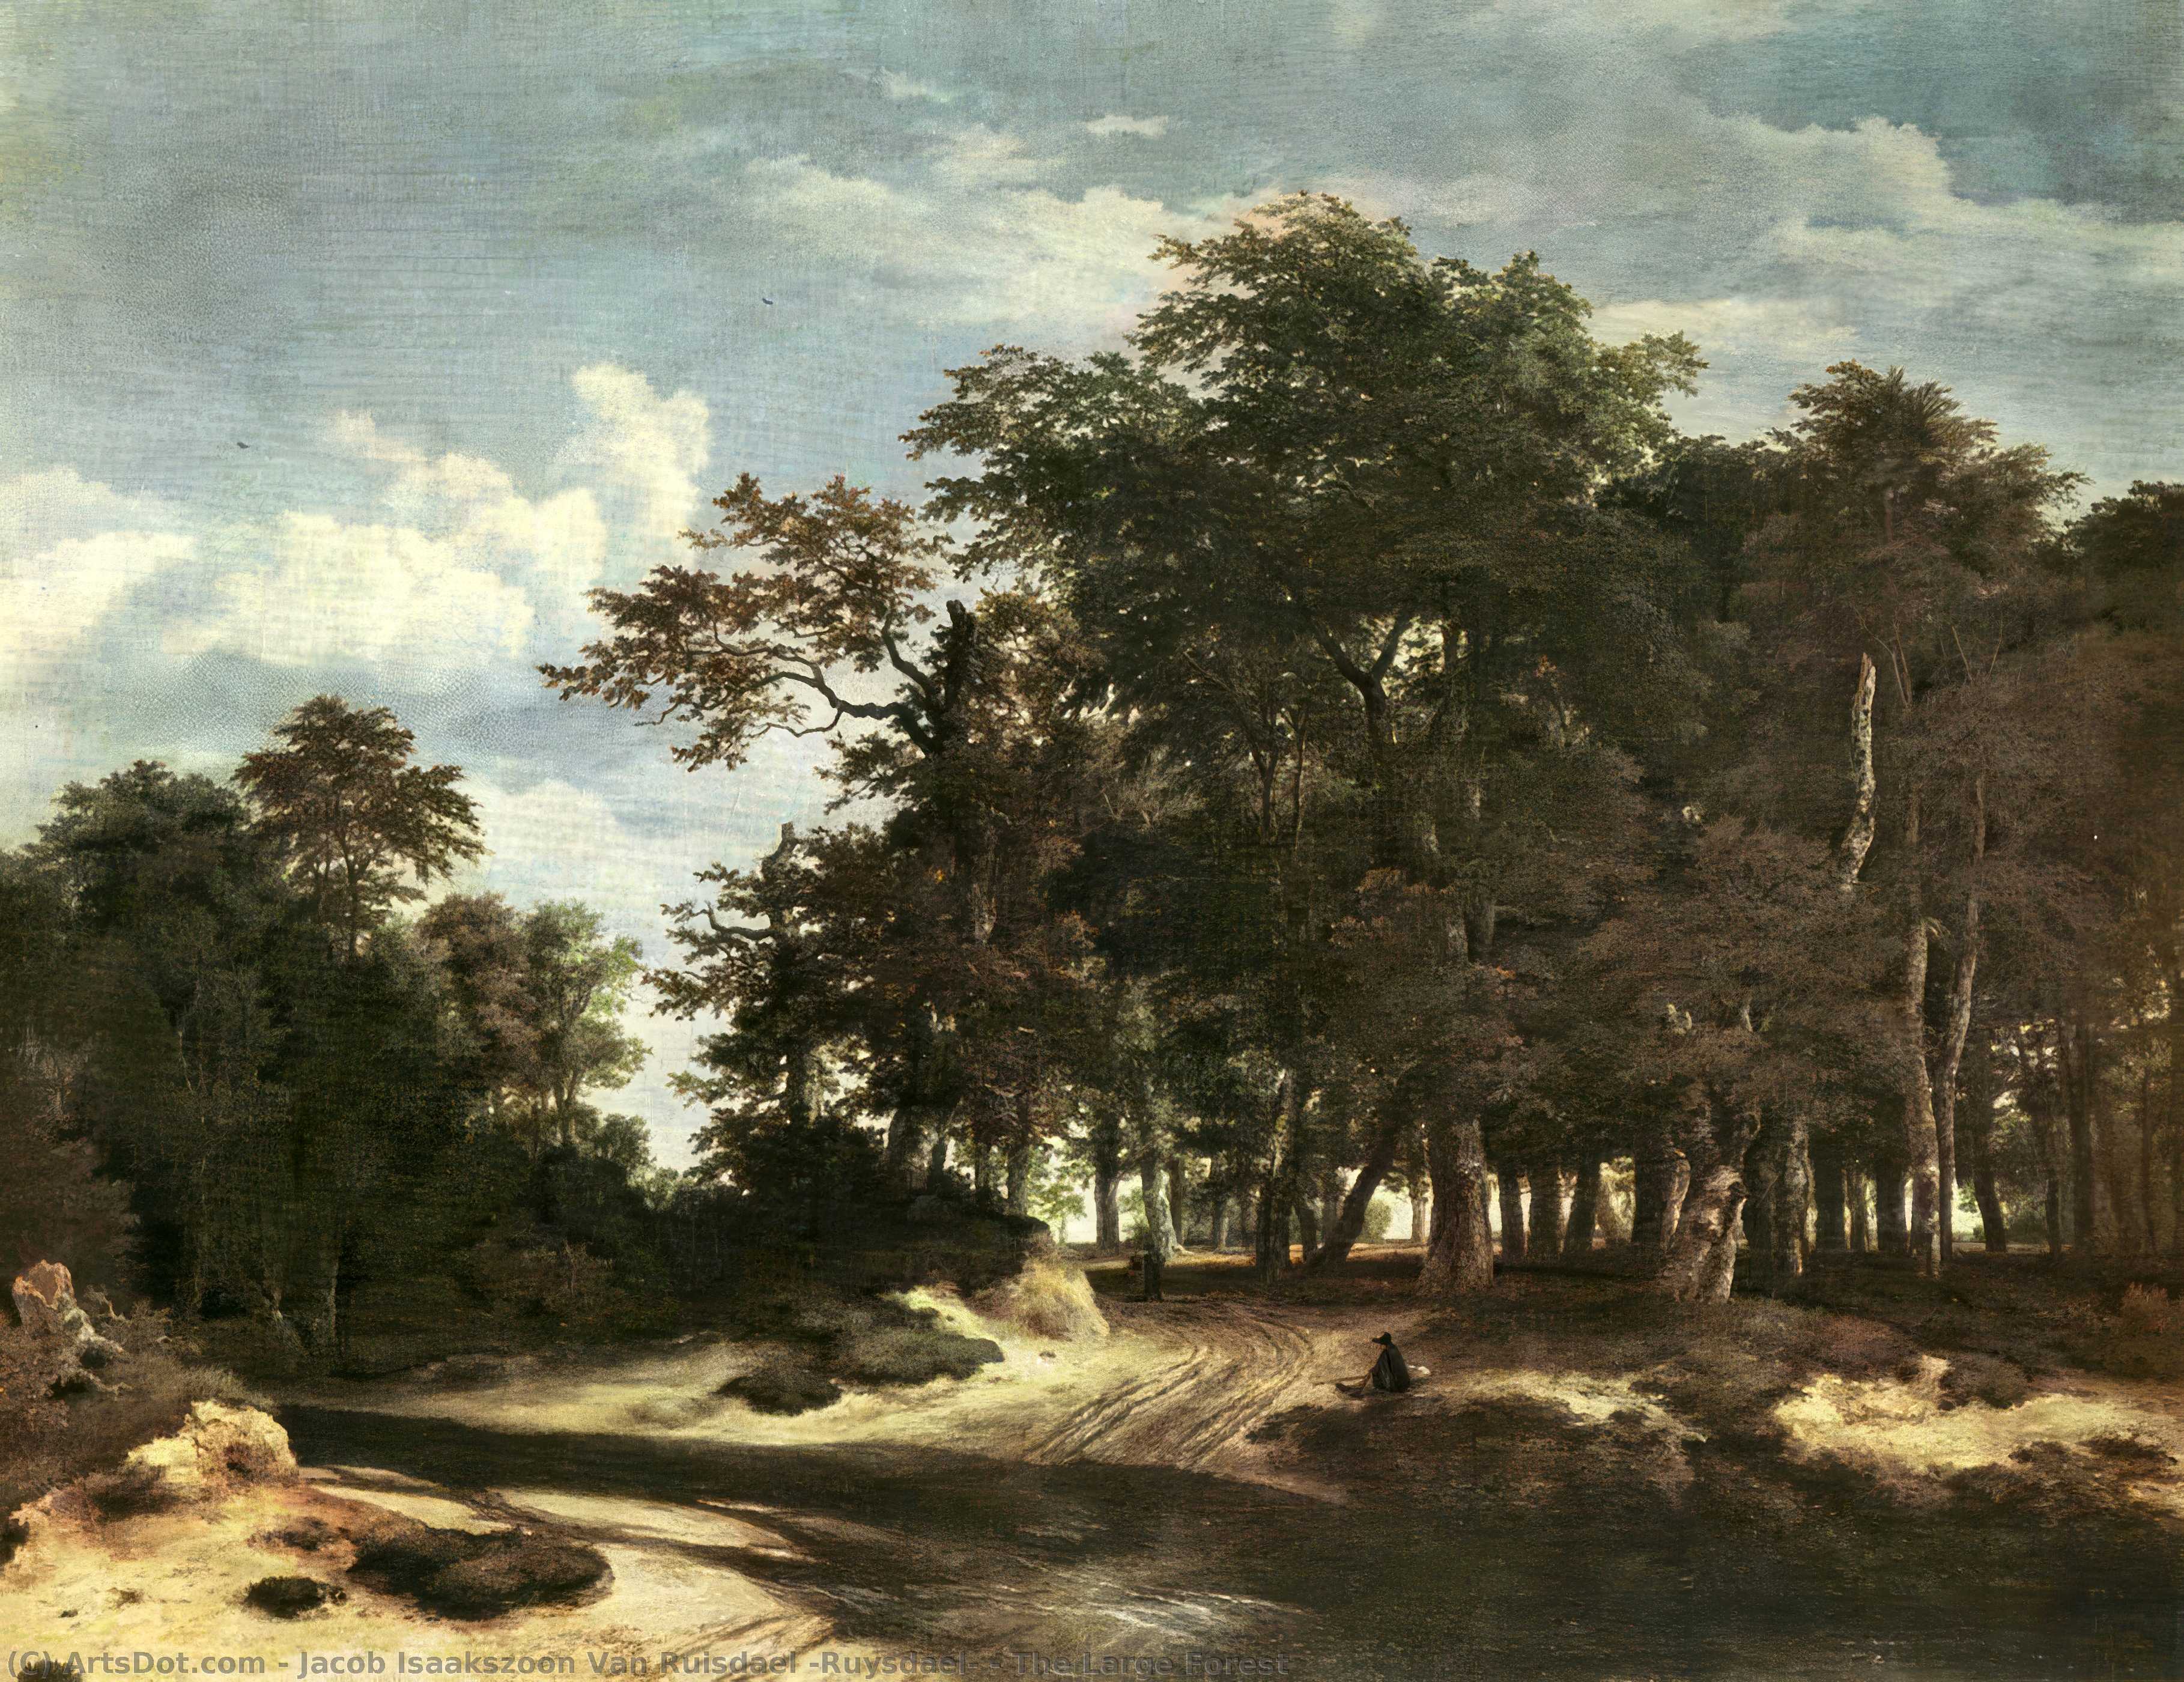 Order Art Reproductions The Large Forest by Jacob Isaakszoon Van Ruisdael (Ruysdael) (1629-1682, Netherlands) | ArtsDot.com